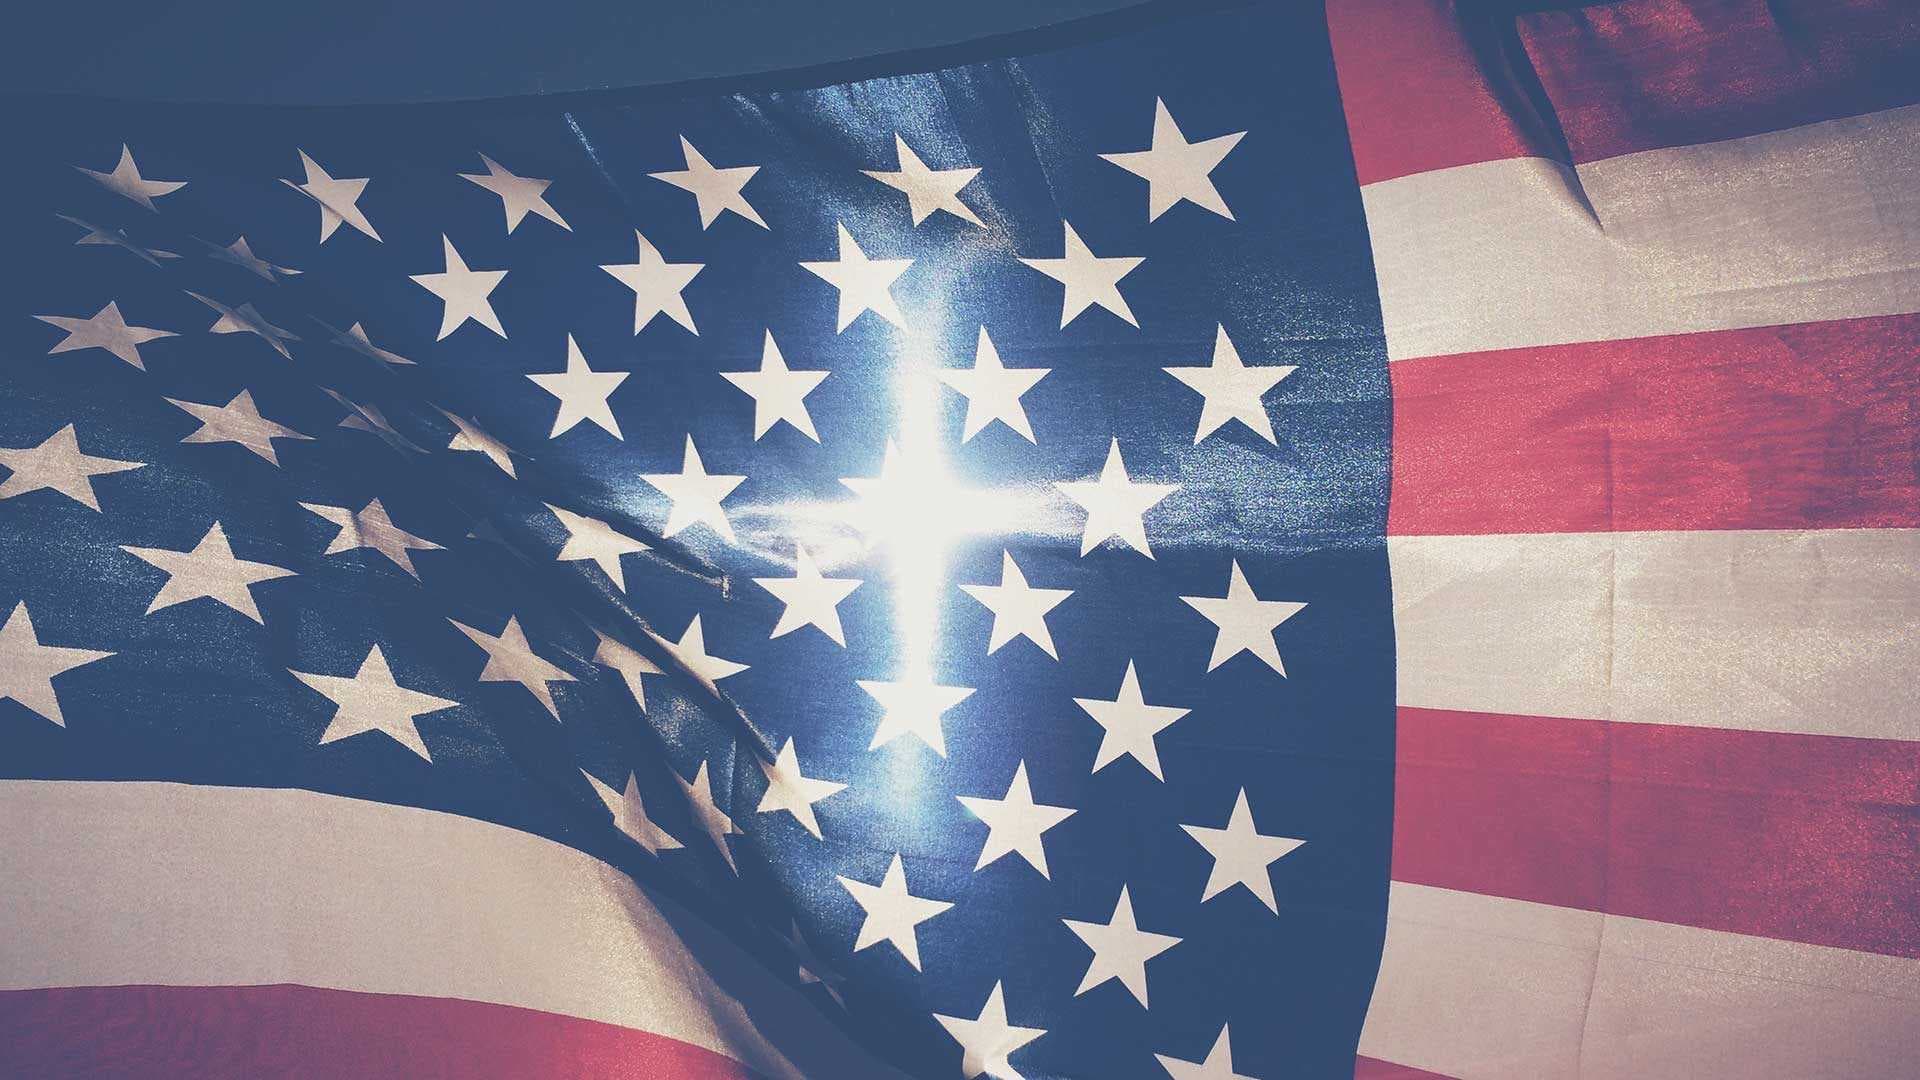 American flag with cross-shaped ray of light